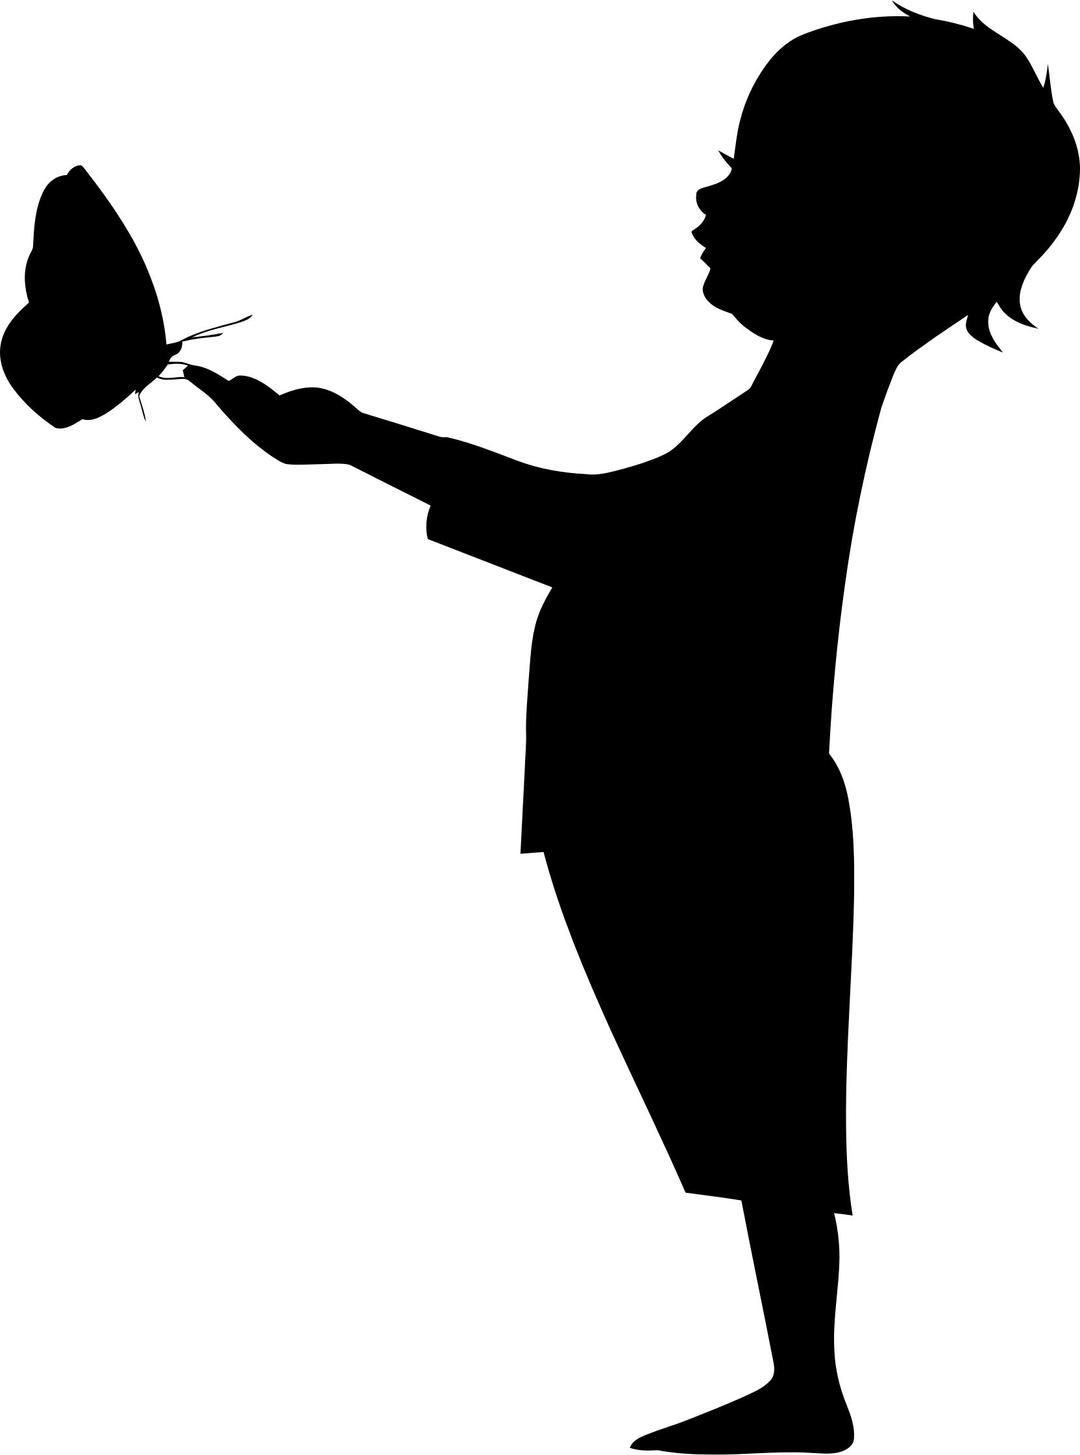 Child Holding Butterfly Silhouette png transparent